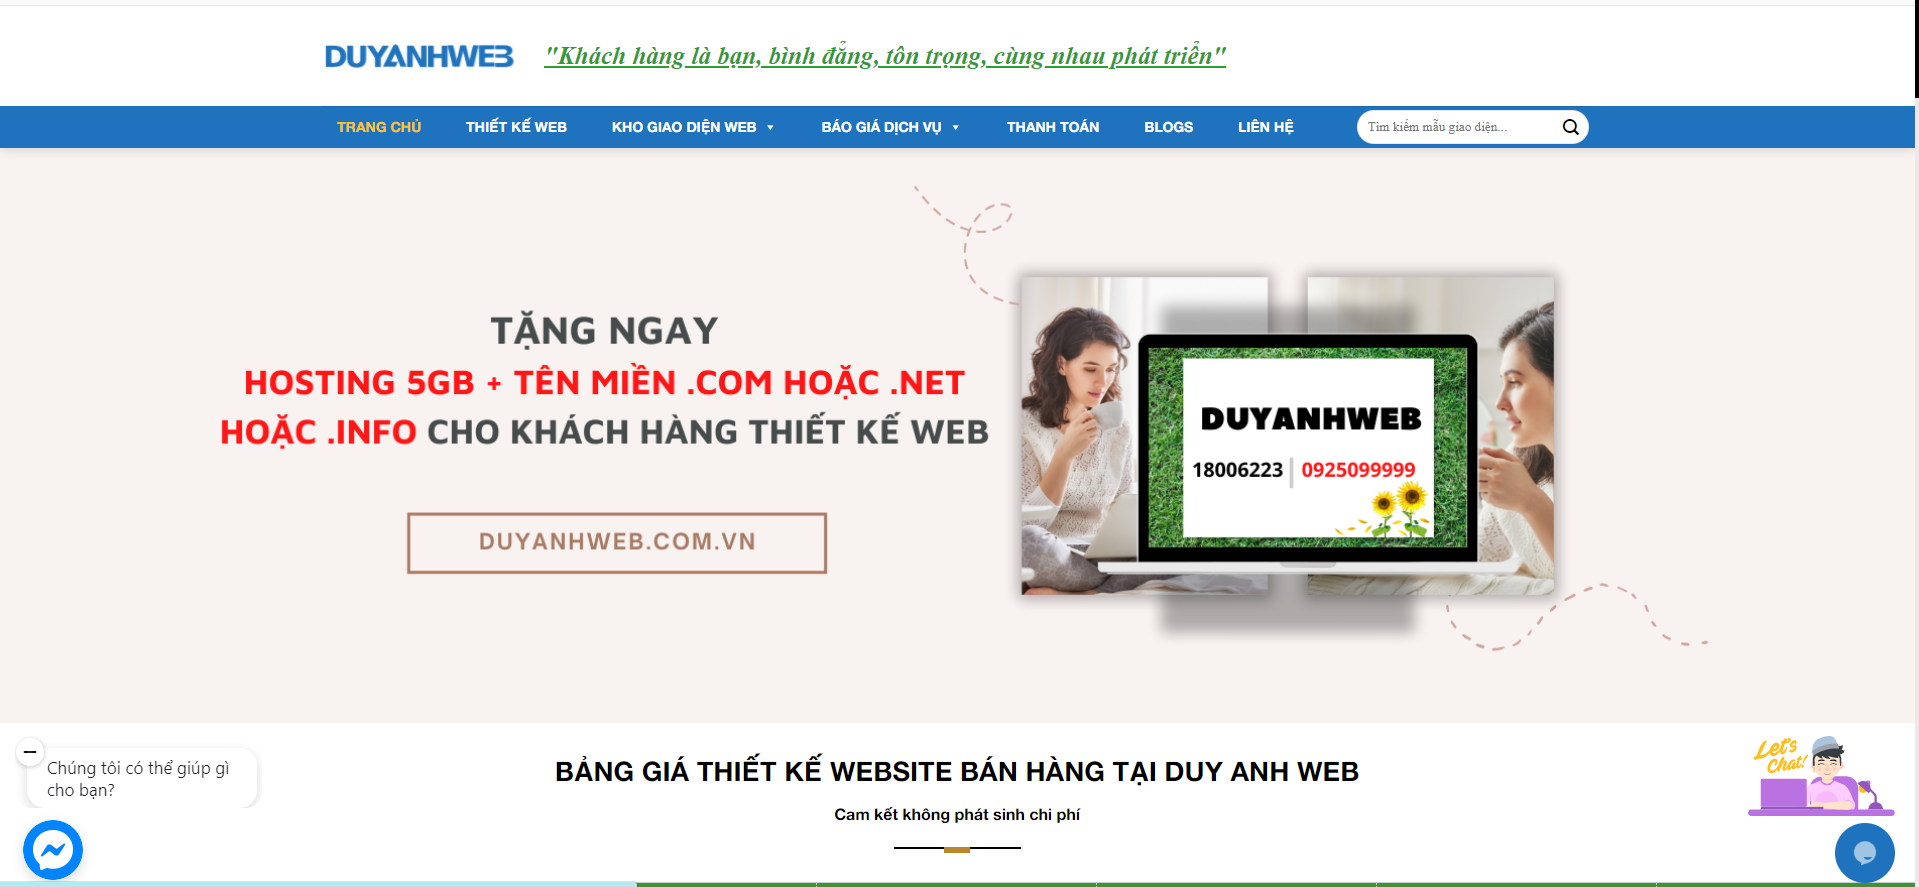 duy anh web